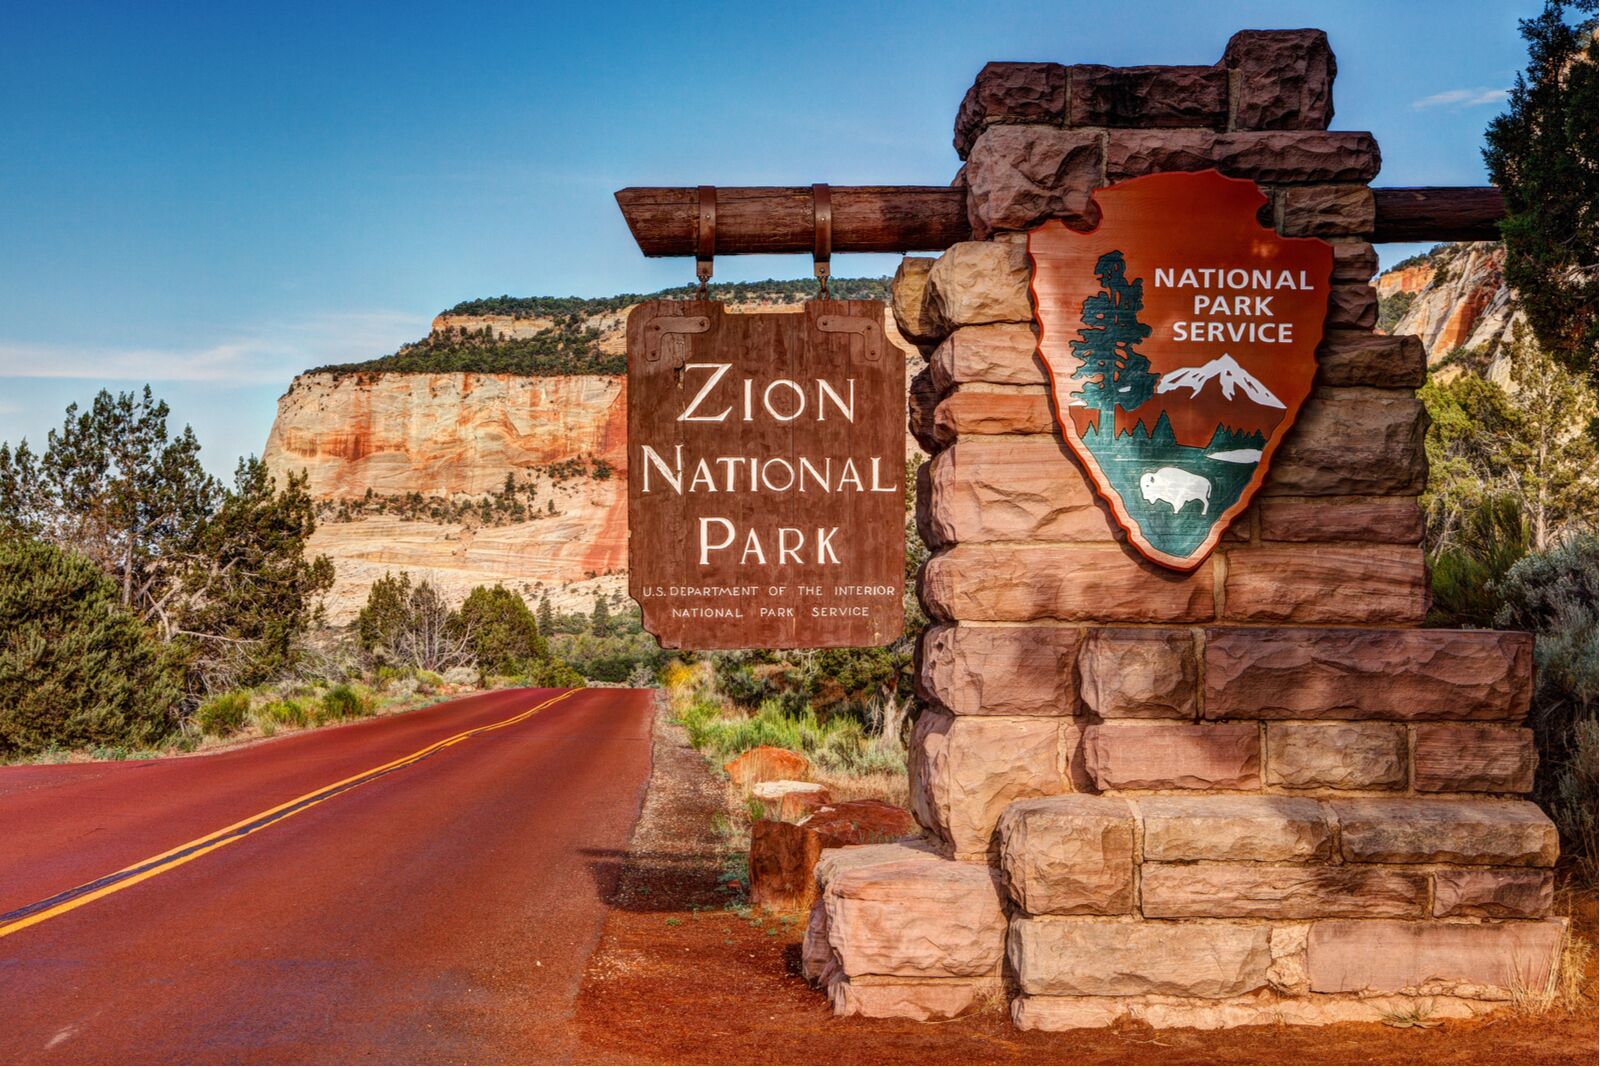 Springdale, the gateway town for Zion National Park